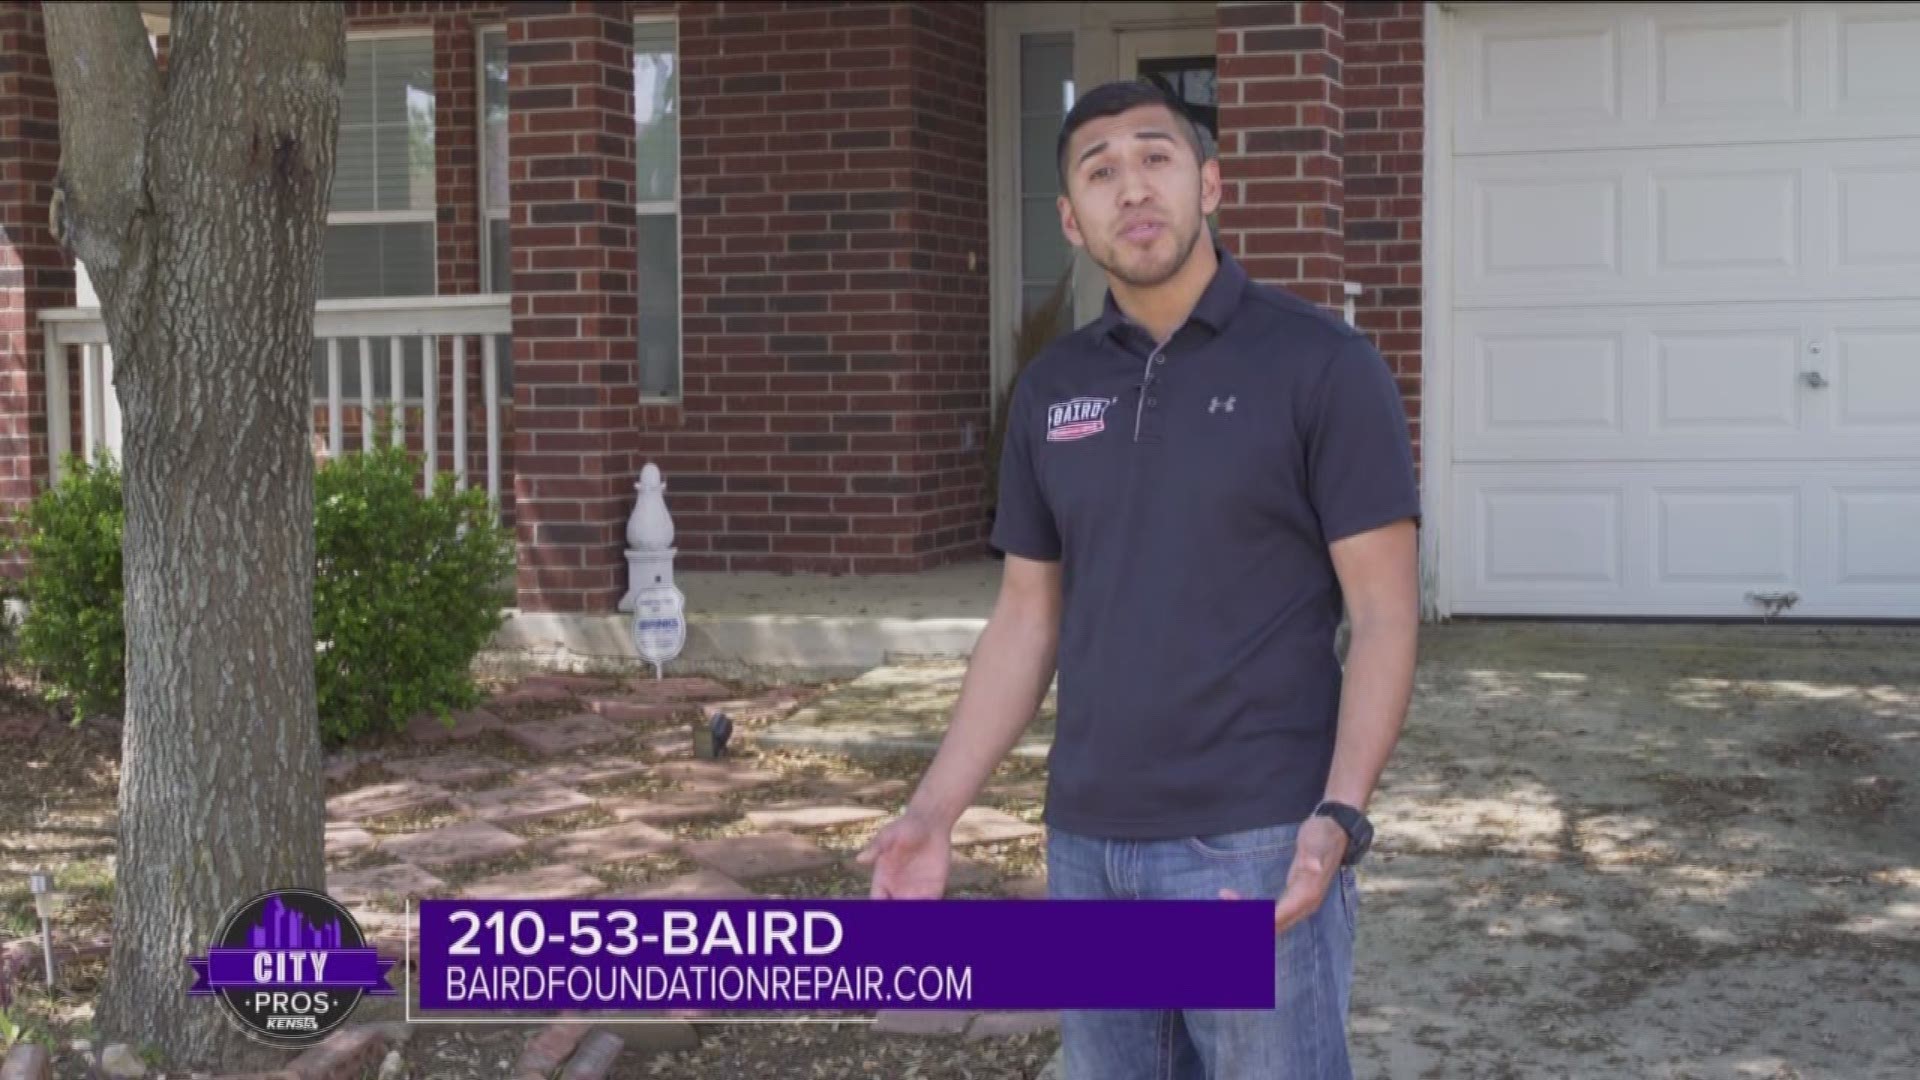 Baird Foundation shows how simple and quick a home inspection with them can be